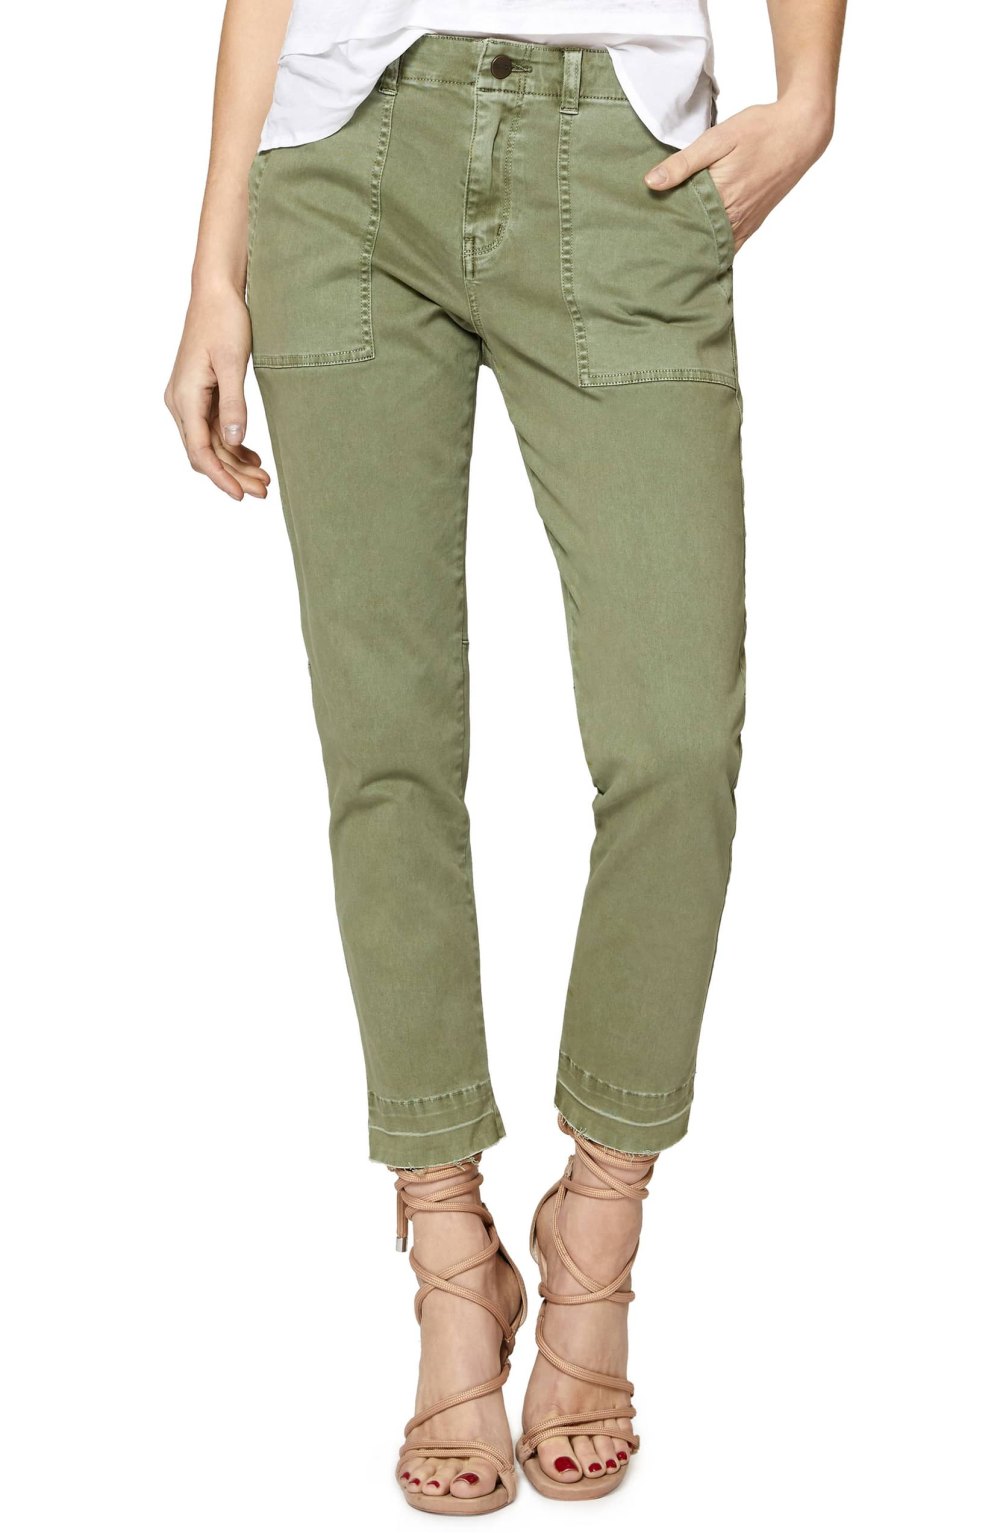 Shop These Cargo Pants Inspired by New York Fashion Week